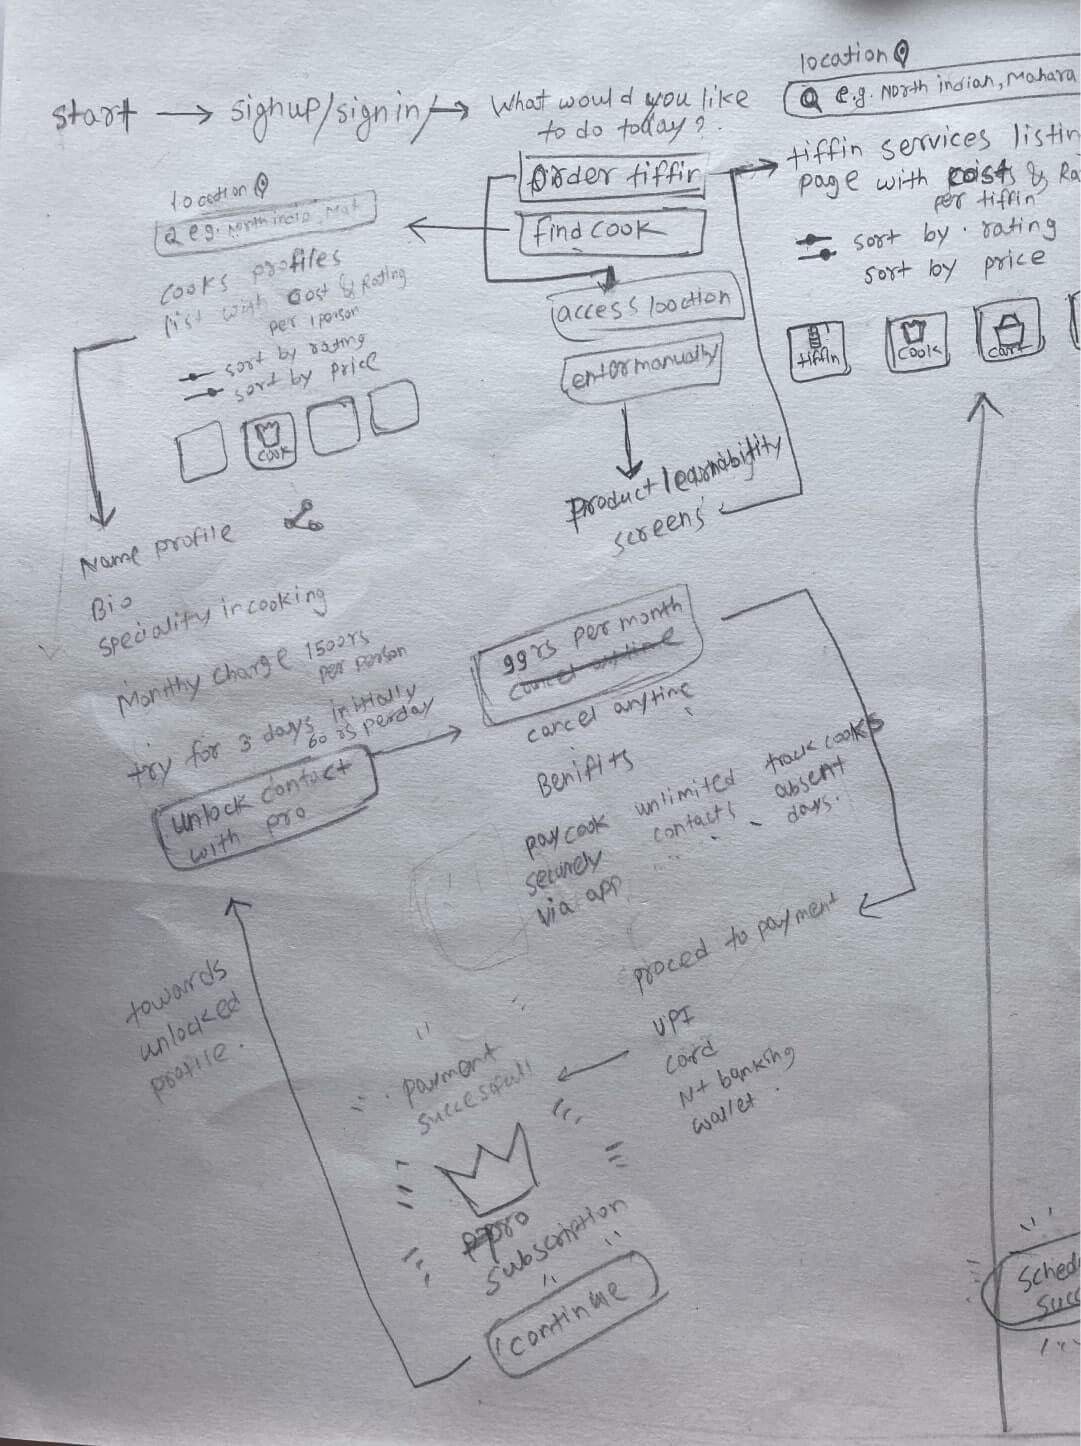 rough sketches to visualize a flow of finding a tiffin service